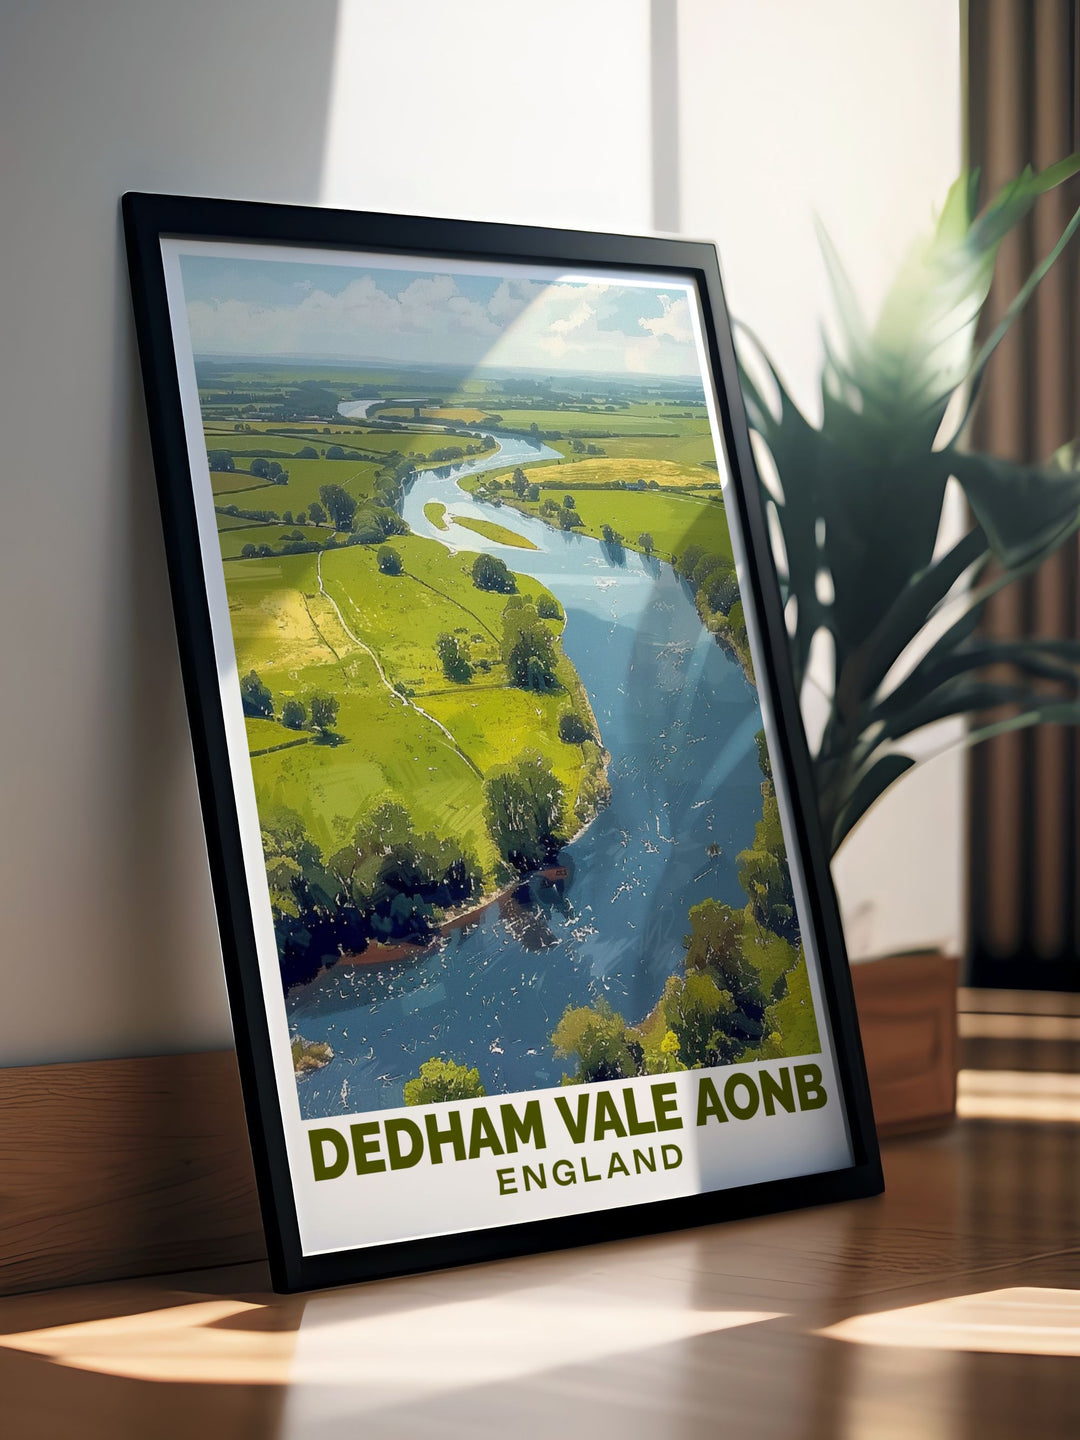 Gallery wall art illustrating the timeless beauty of Dedham Vale, with its rolling hills and historic buildings, perfect for enhancing any room with the charm of the English countryside.